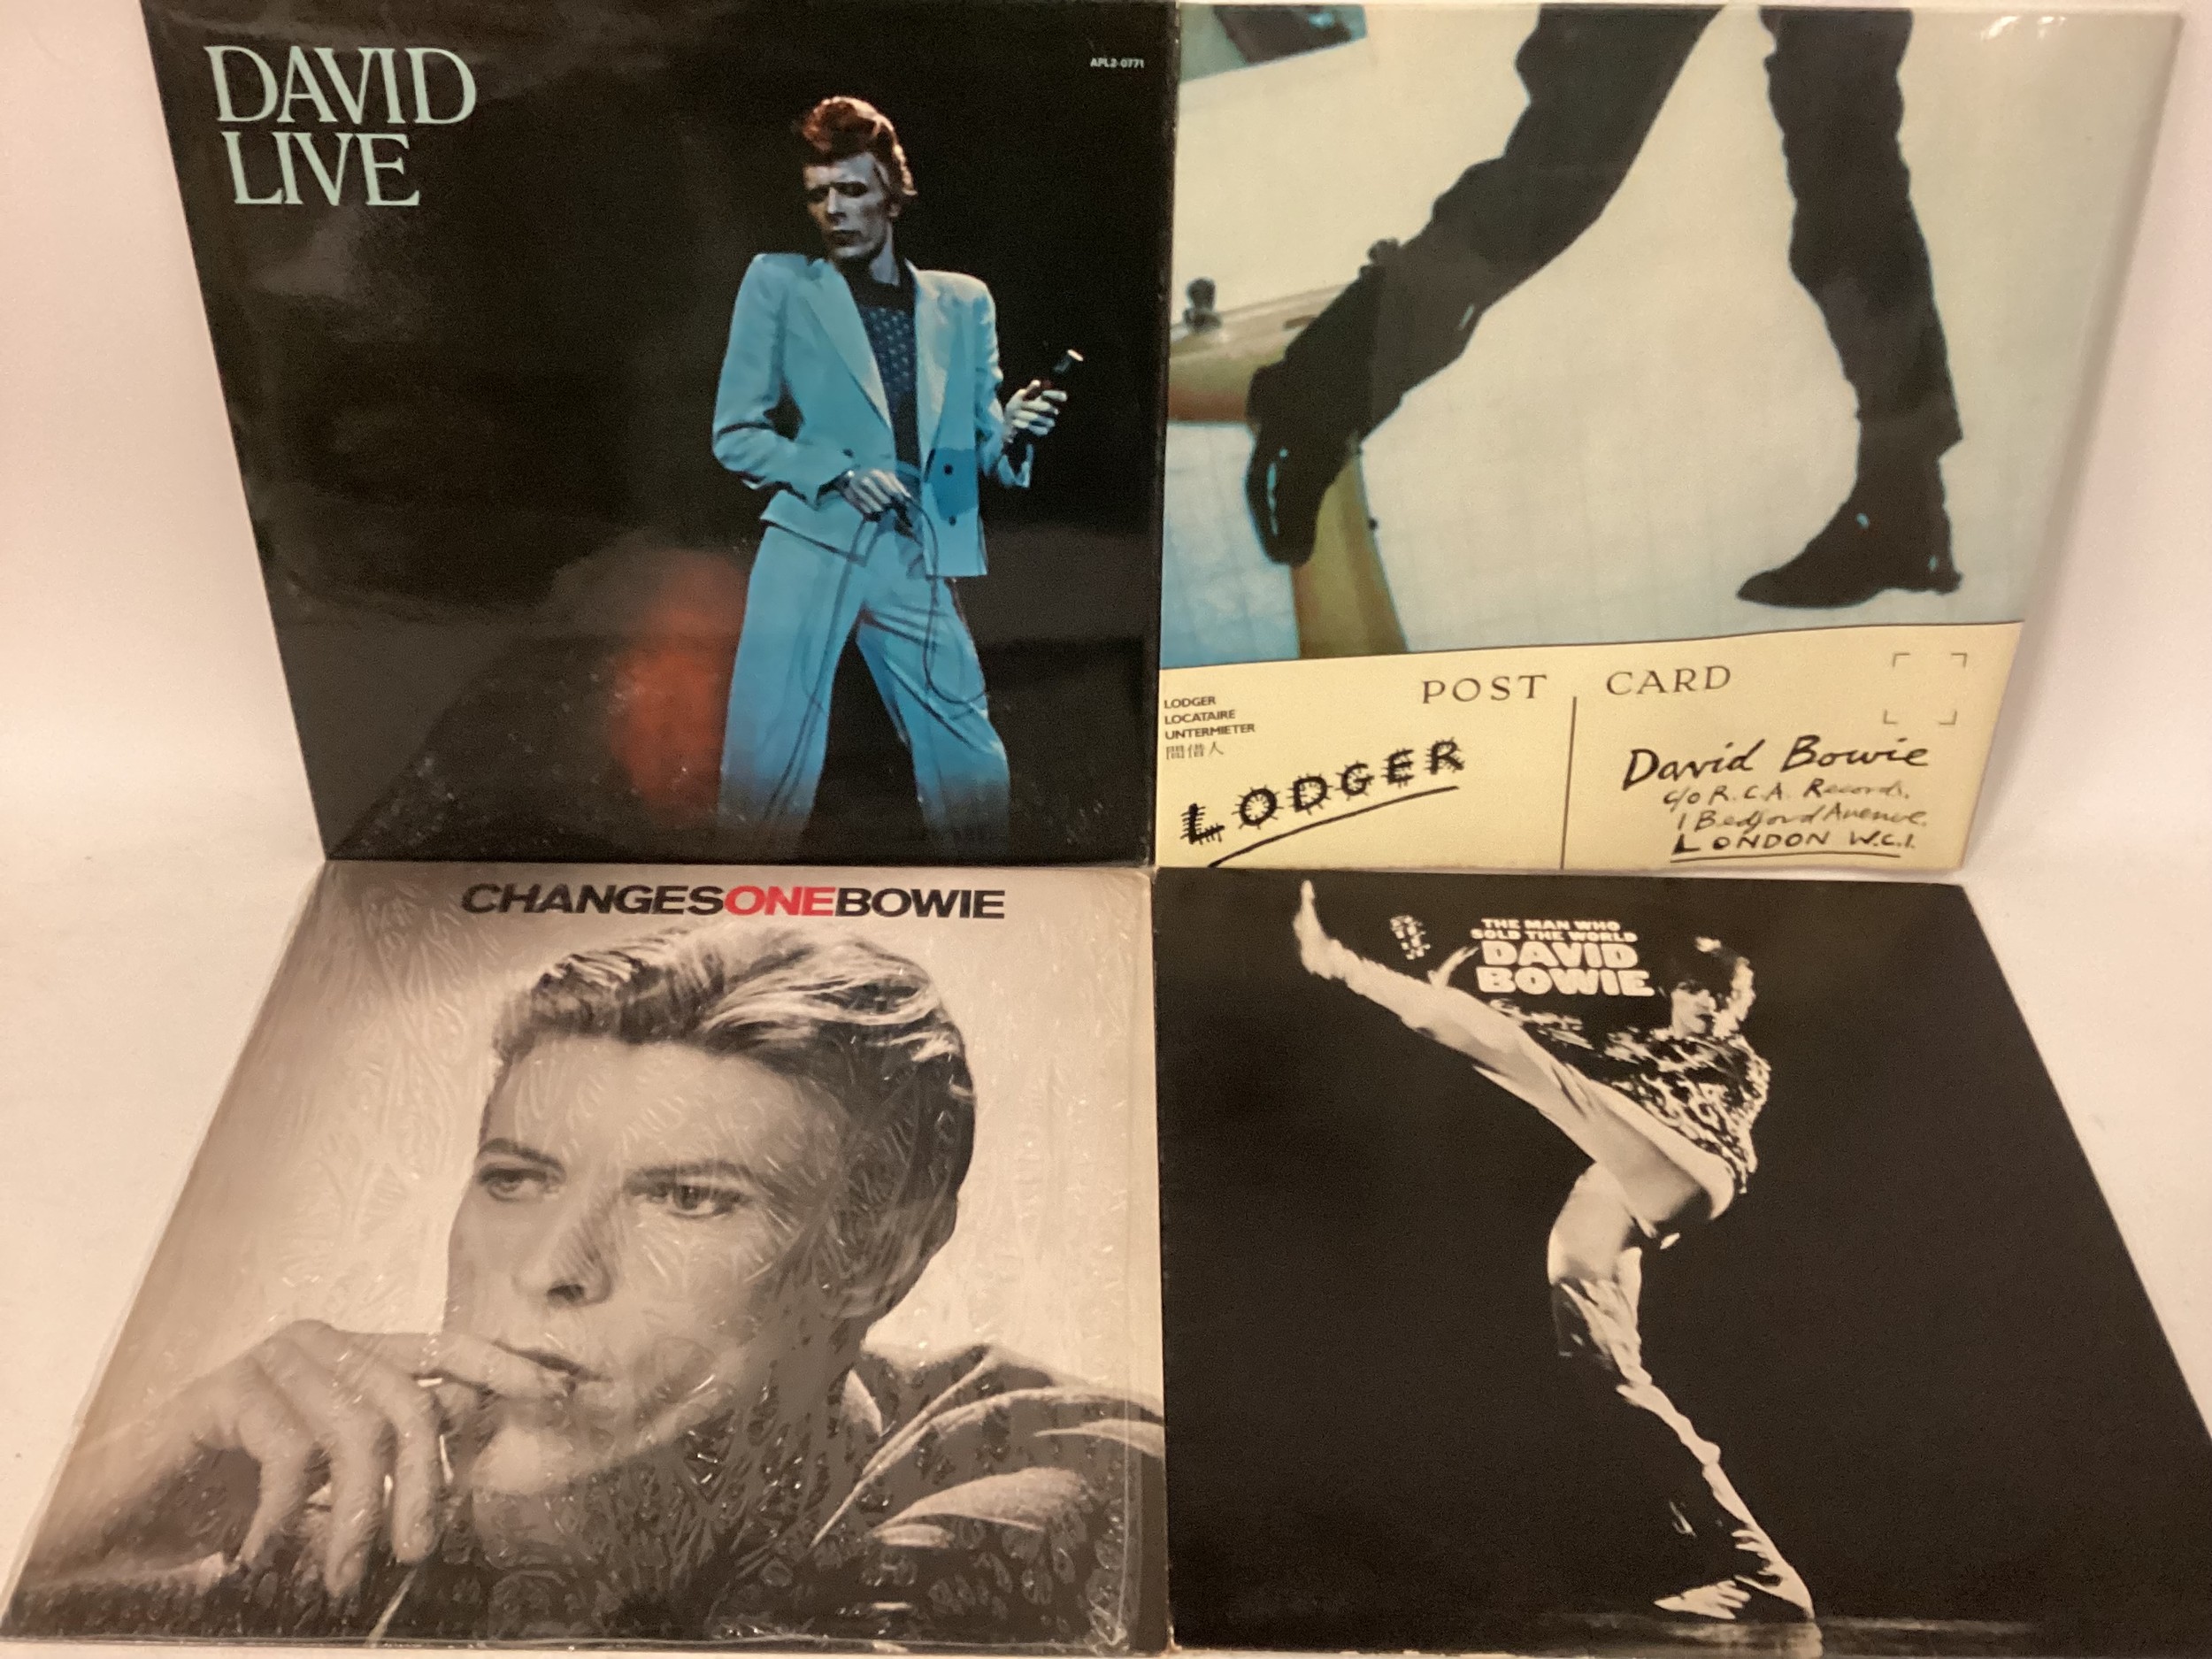 SELECTION OF 4 DAVID BOWIE VINYL LP RECORDS. Titles are as follows - ‘The Man Who Sold The World’ on